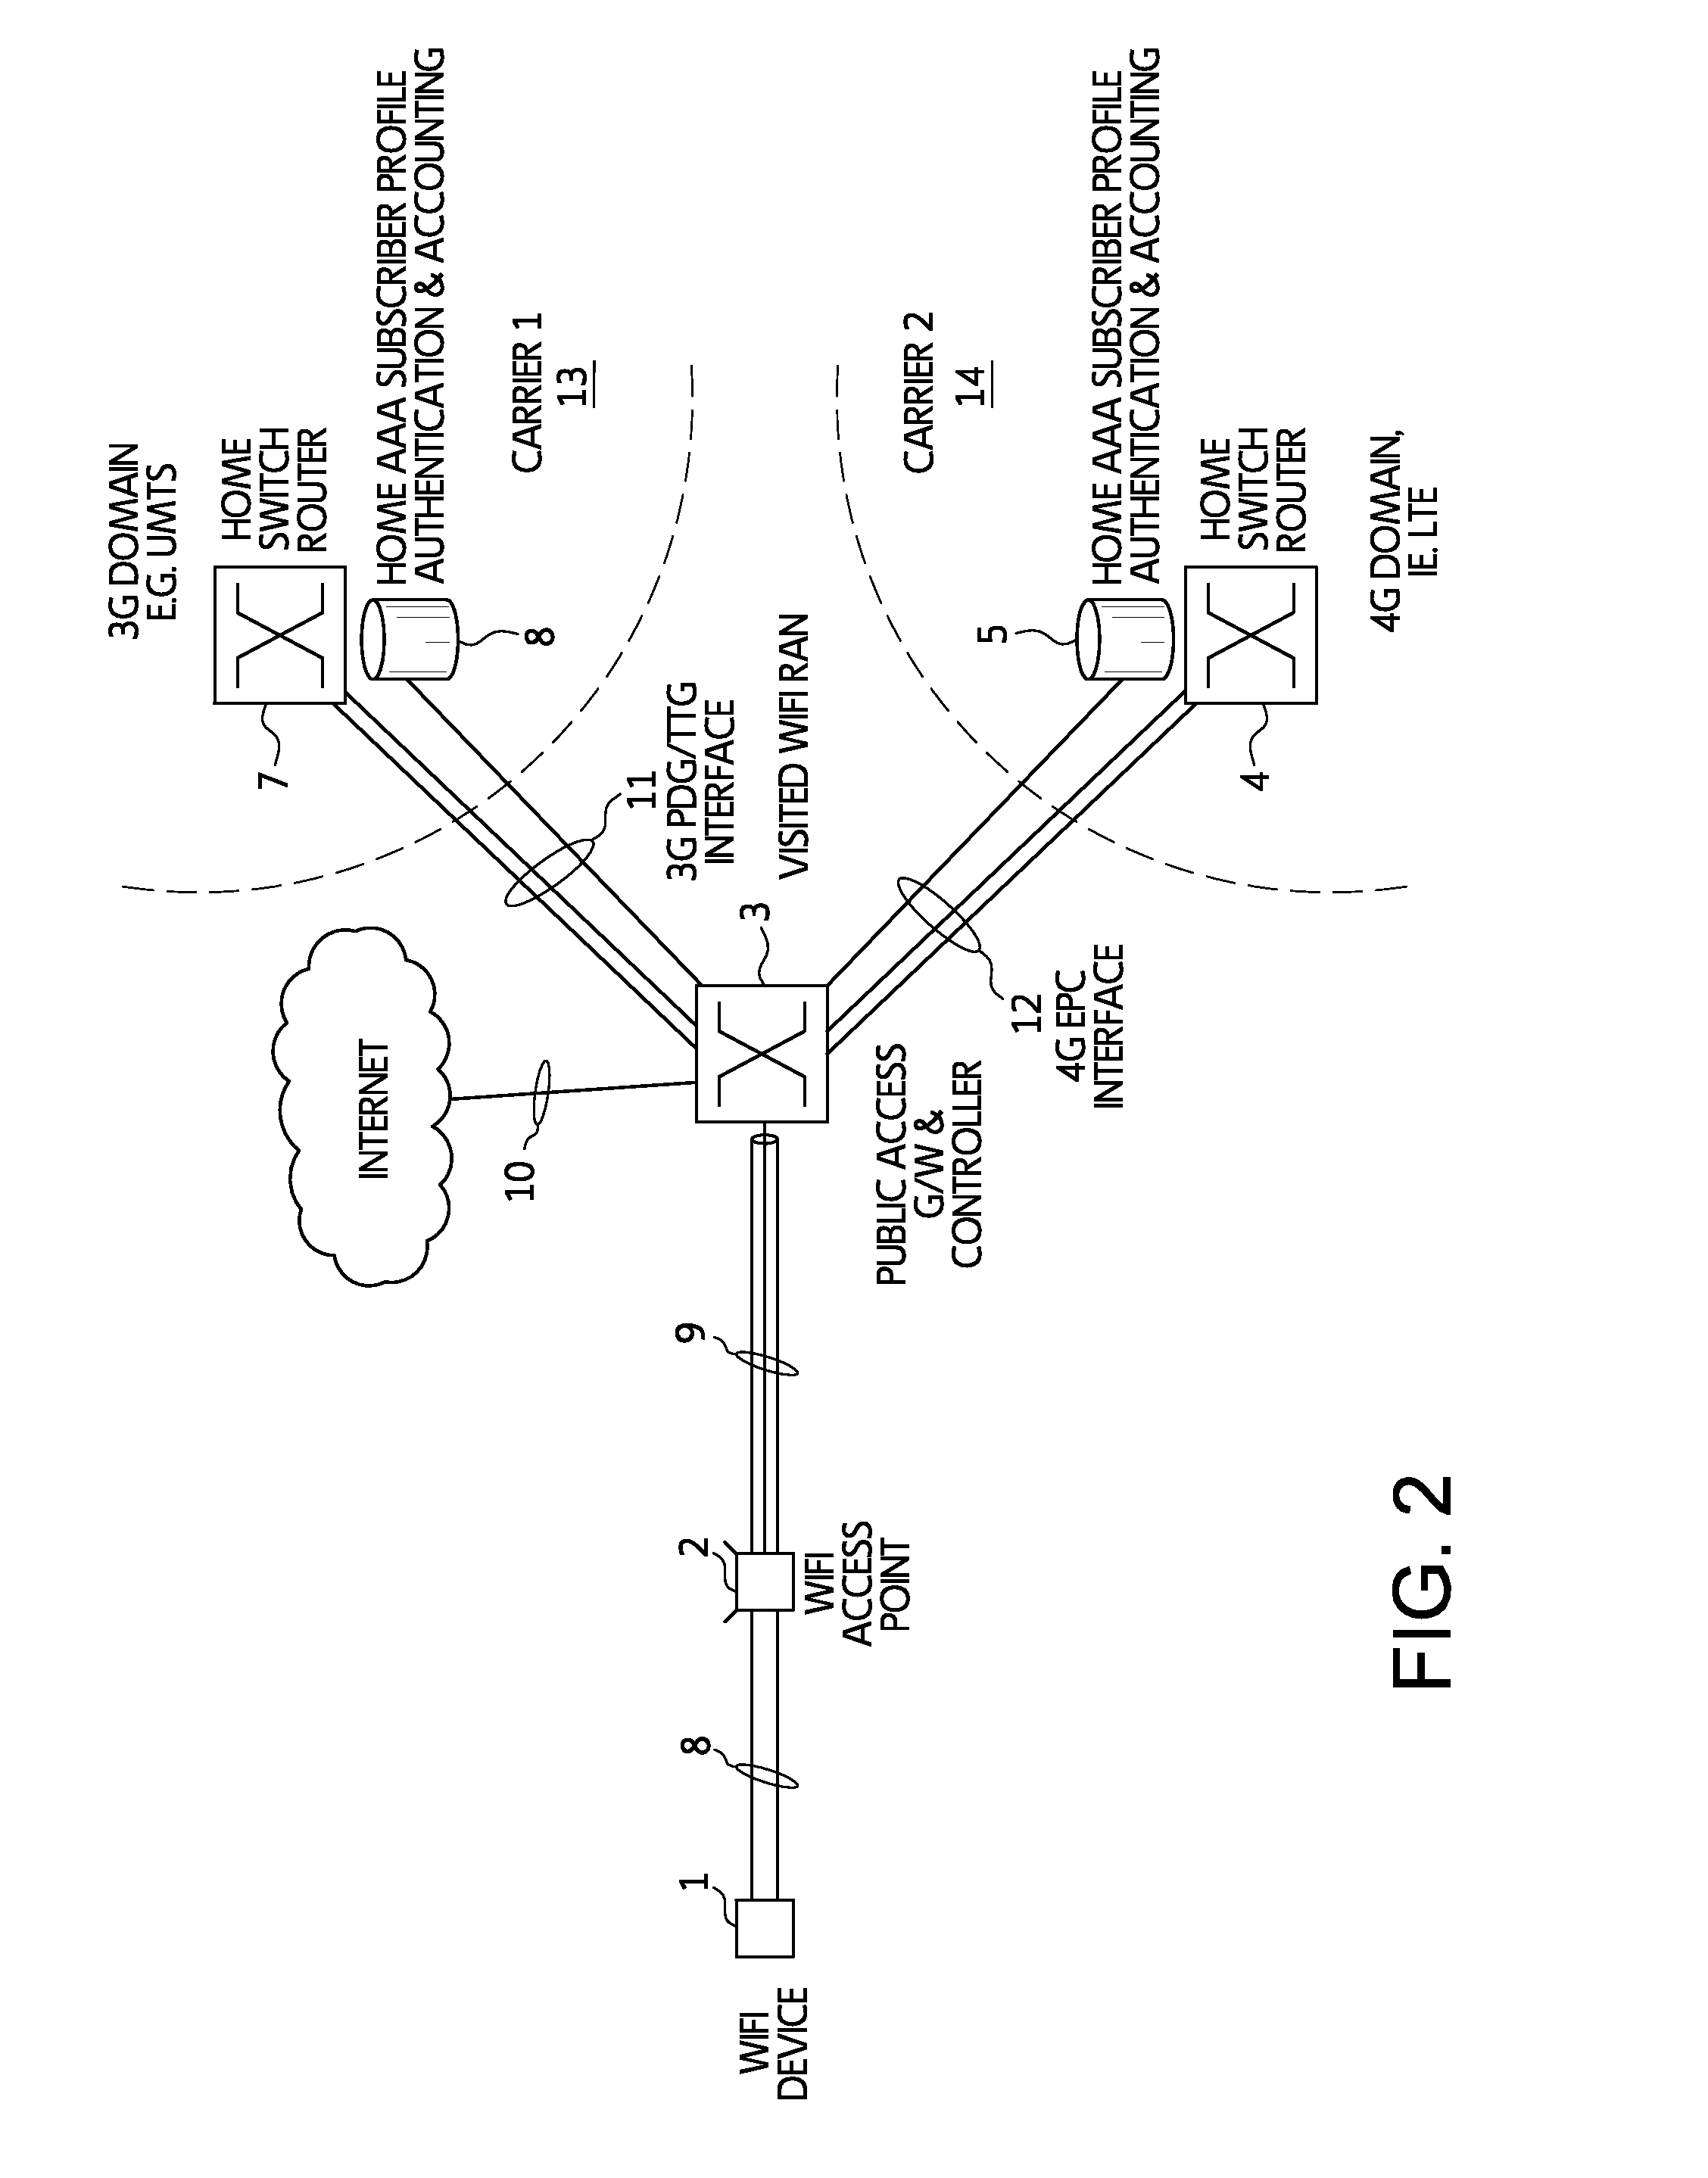 Neutral host wireless local area network apparatus and method and/or data offloading architecture apparatus and method